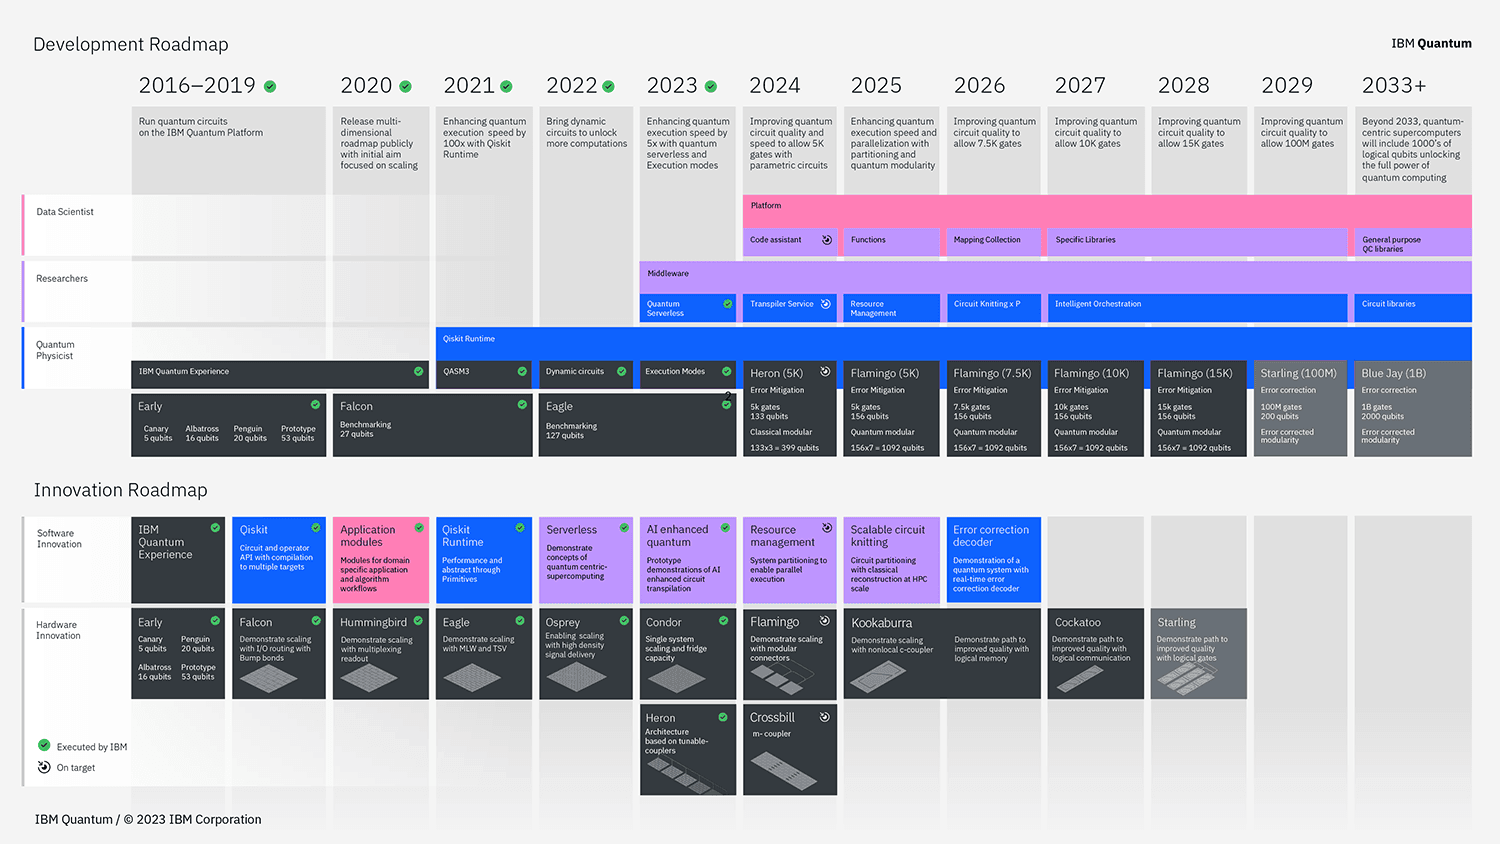 The IBM Quantum Development and Innovation Roadmap now extends to 2033 for a decade worth of quantum innovation.